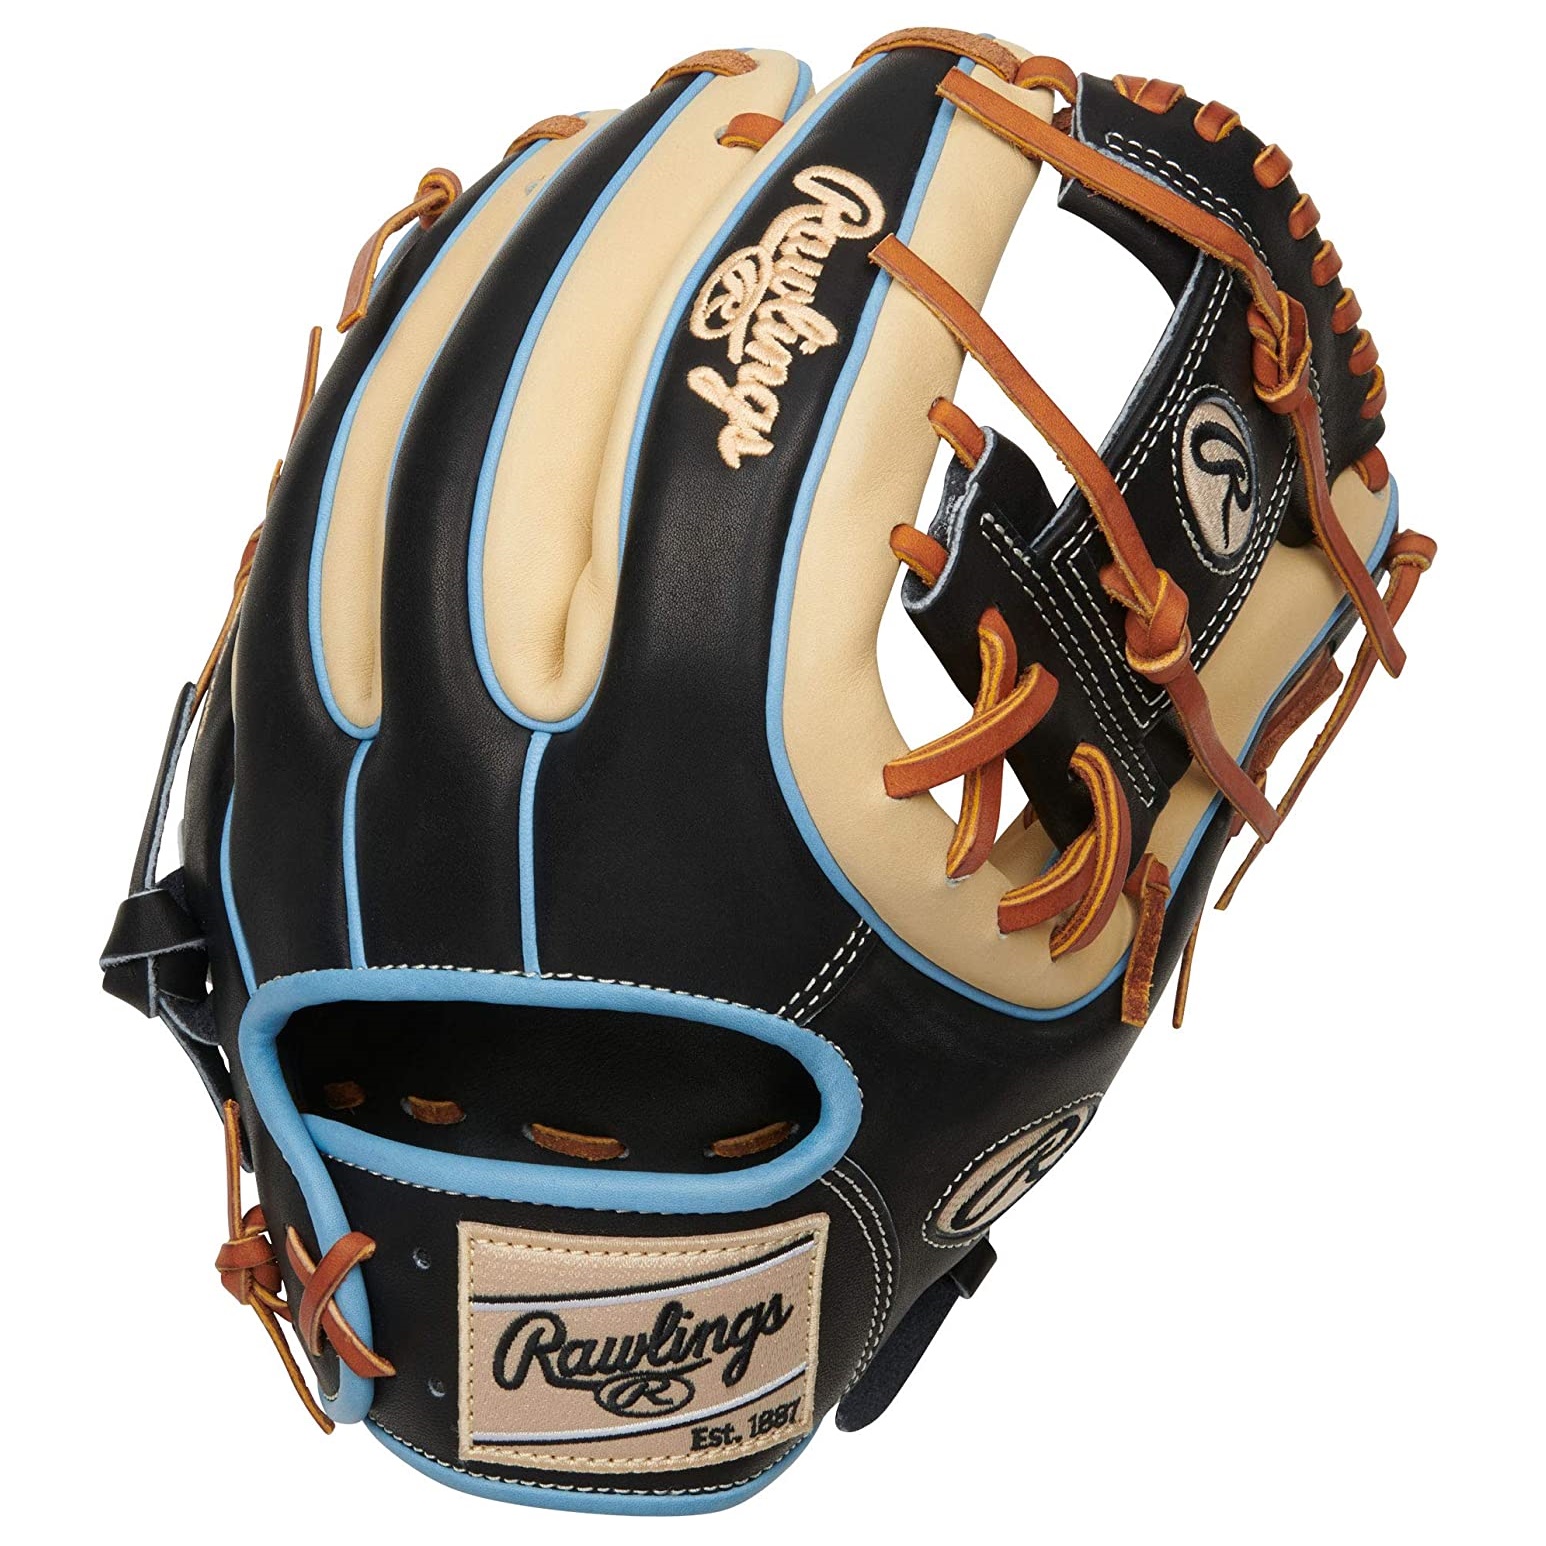 The 2021 11.75-inch Heart of the Hide infield glove offers unmatched quality and performance. As a result you'll dominate up the middle every inning out. It was artfully crafted from our ultra-premium steer-hide leather for enhanced durability. In addition, the HOH leather is engineered to help you form the perfect pocket. This HOH infield glove's popular 31-pattern is perfect for infielders who want lightning quick ball transfers to turn more double plays. Just like all of our Heart of the Hide gloves, this pro model also gives you the best in comfort and feel, thanks to its deer-tanned cowhide lining, padded thumb sleeve, and thermoformed wrist lining. This particular HOH also features a unique, three-tone camel, black, & Columbia blue design, and a pro I-web; the #1 choice of the game's best infielders. Made for elite infielders looking to join the next class of defensive greats, it's sure to become your next gamer. Order now! Rawlings, the Mark of a Pro.  Throwing Hand:   Right  Sport:   Baseball  Back:   Conventional  Player Break-In:   60  Fit:   Standard  Level:   Adult  Lining:   Deer-Tanned Cowhide  Padding:   Moldable  Series:   Heart of the Hide  Shell:   Steer Hide Leather  Web:   Pro I  Size:   11.75 in  Pattern:   31  Age Group:   Pro/College, High School, 14U, 12U  